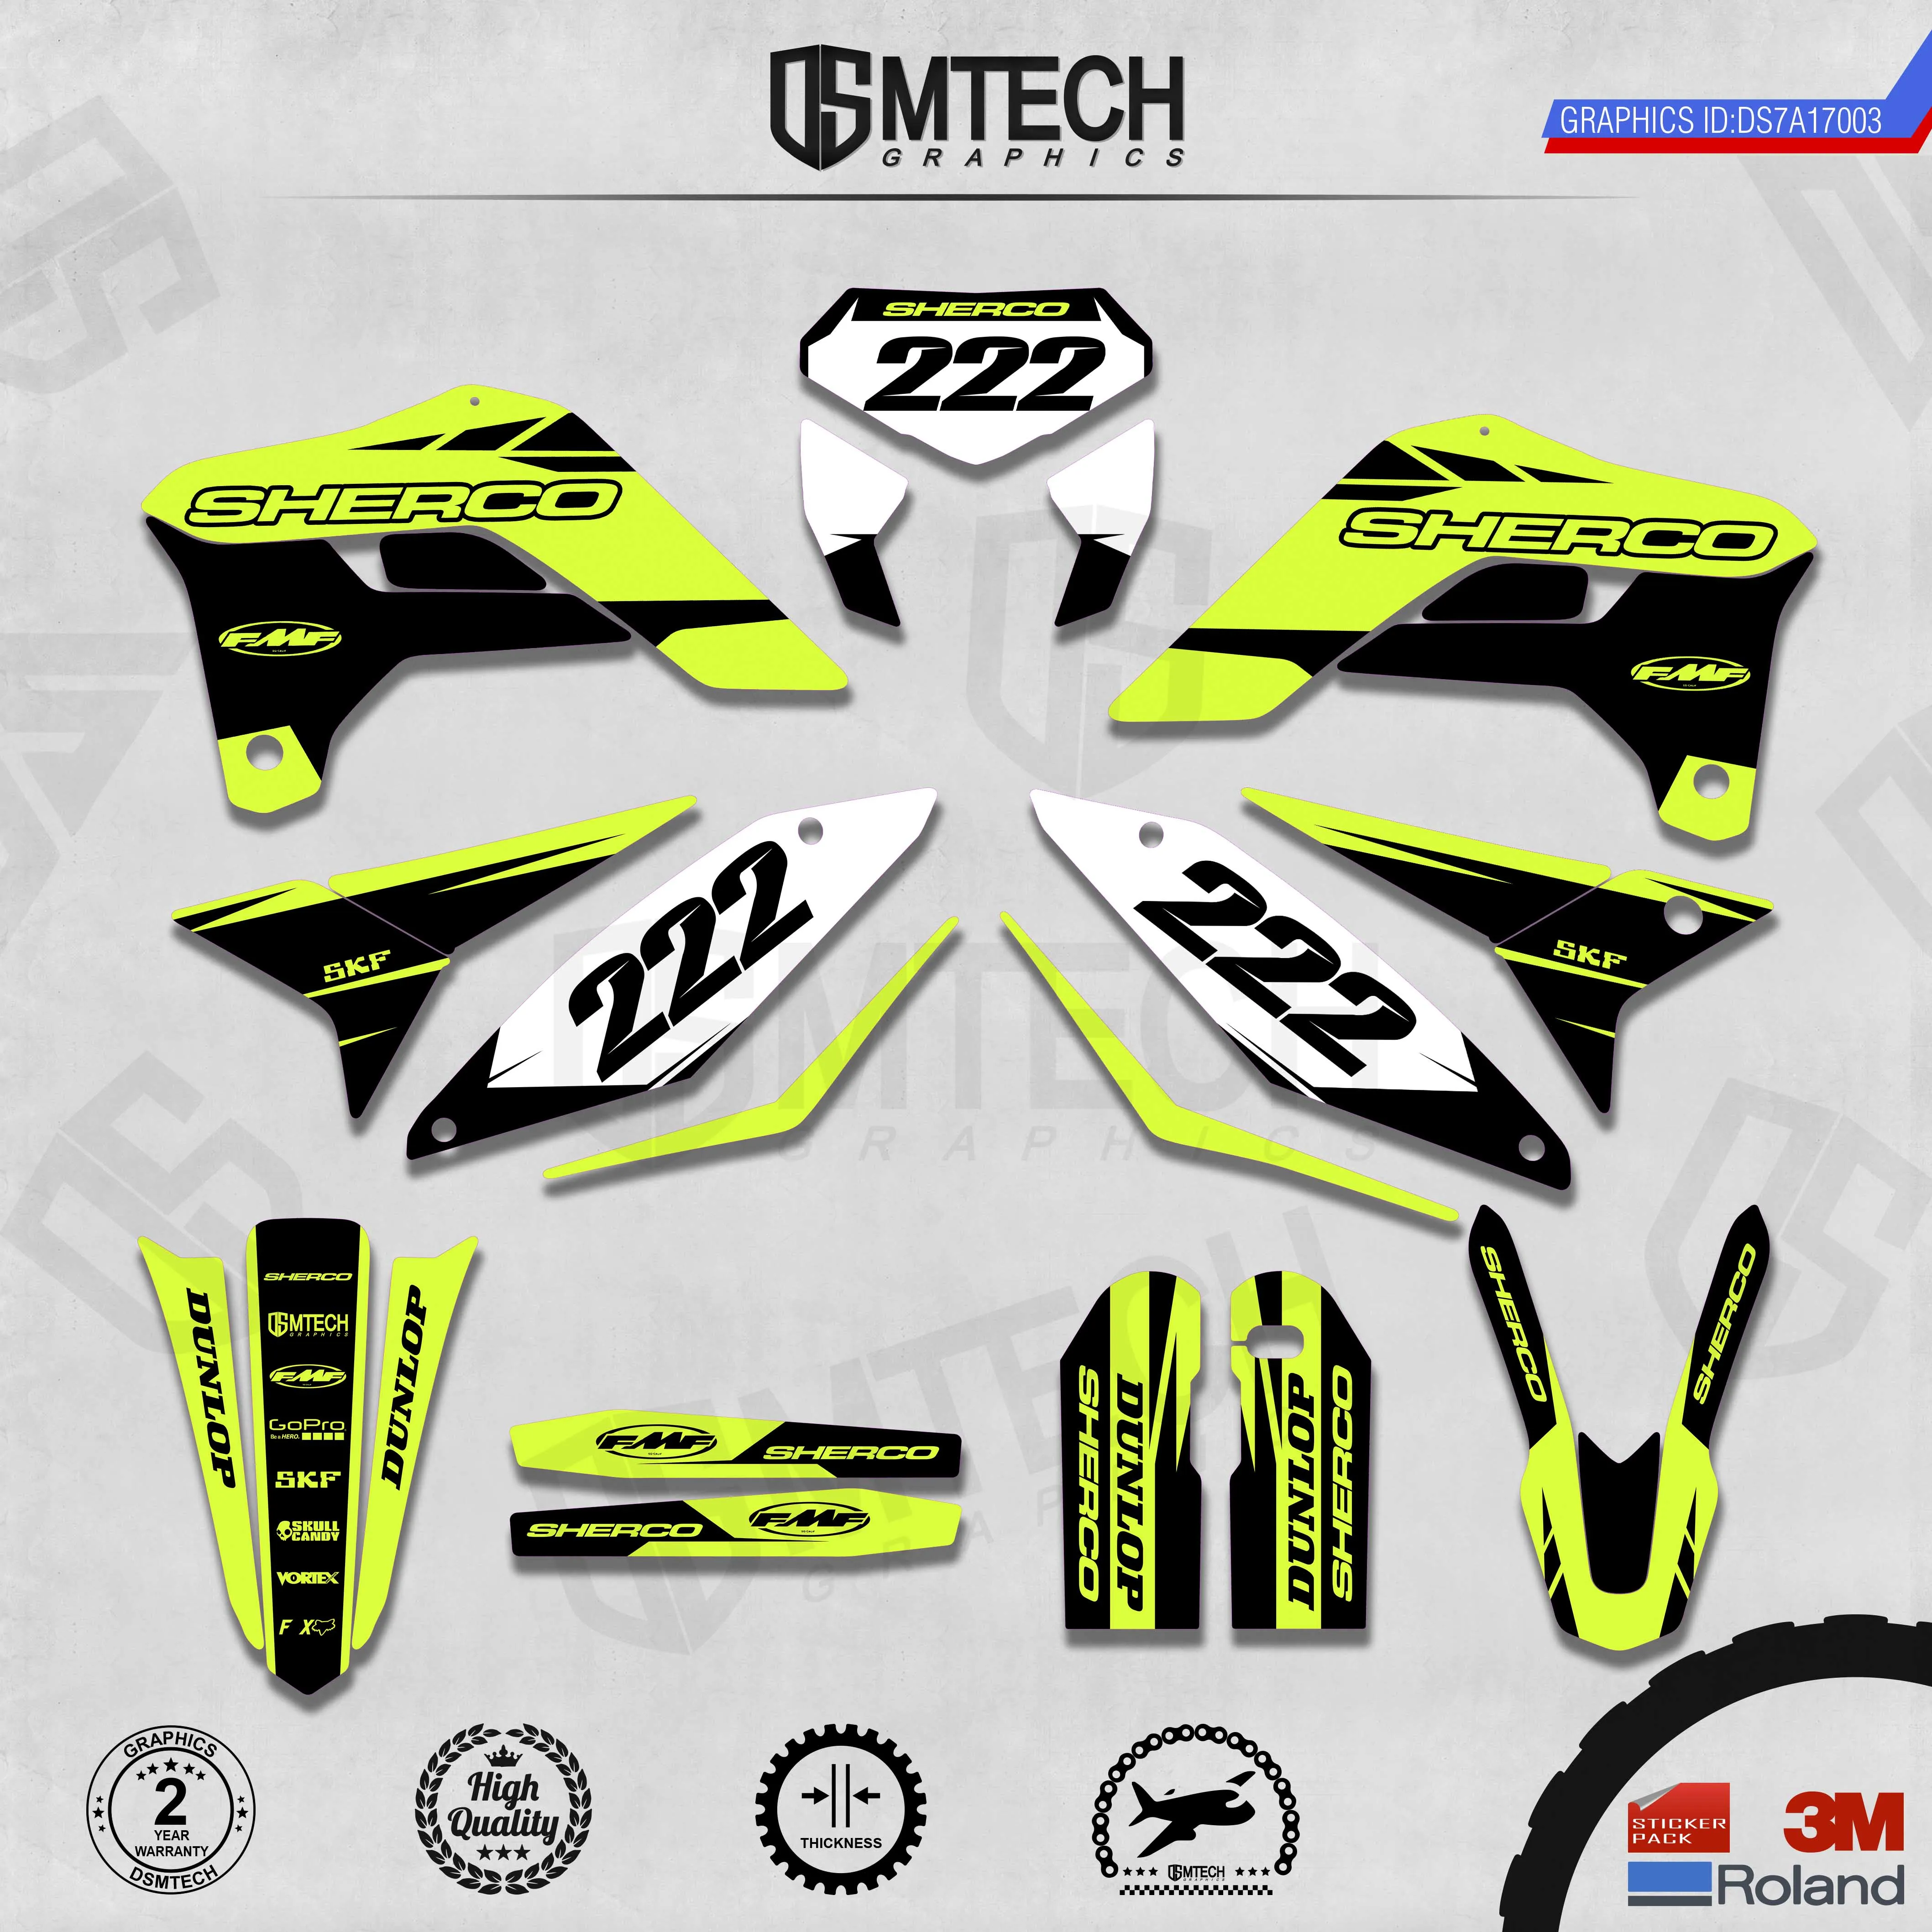 DSMTECH  Custom Team Graphics Decals 3M Stickers Kit For SHERCO Sticker 2017 2018 2019 2020  SE SEF  003